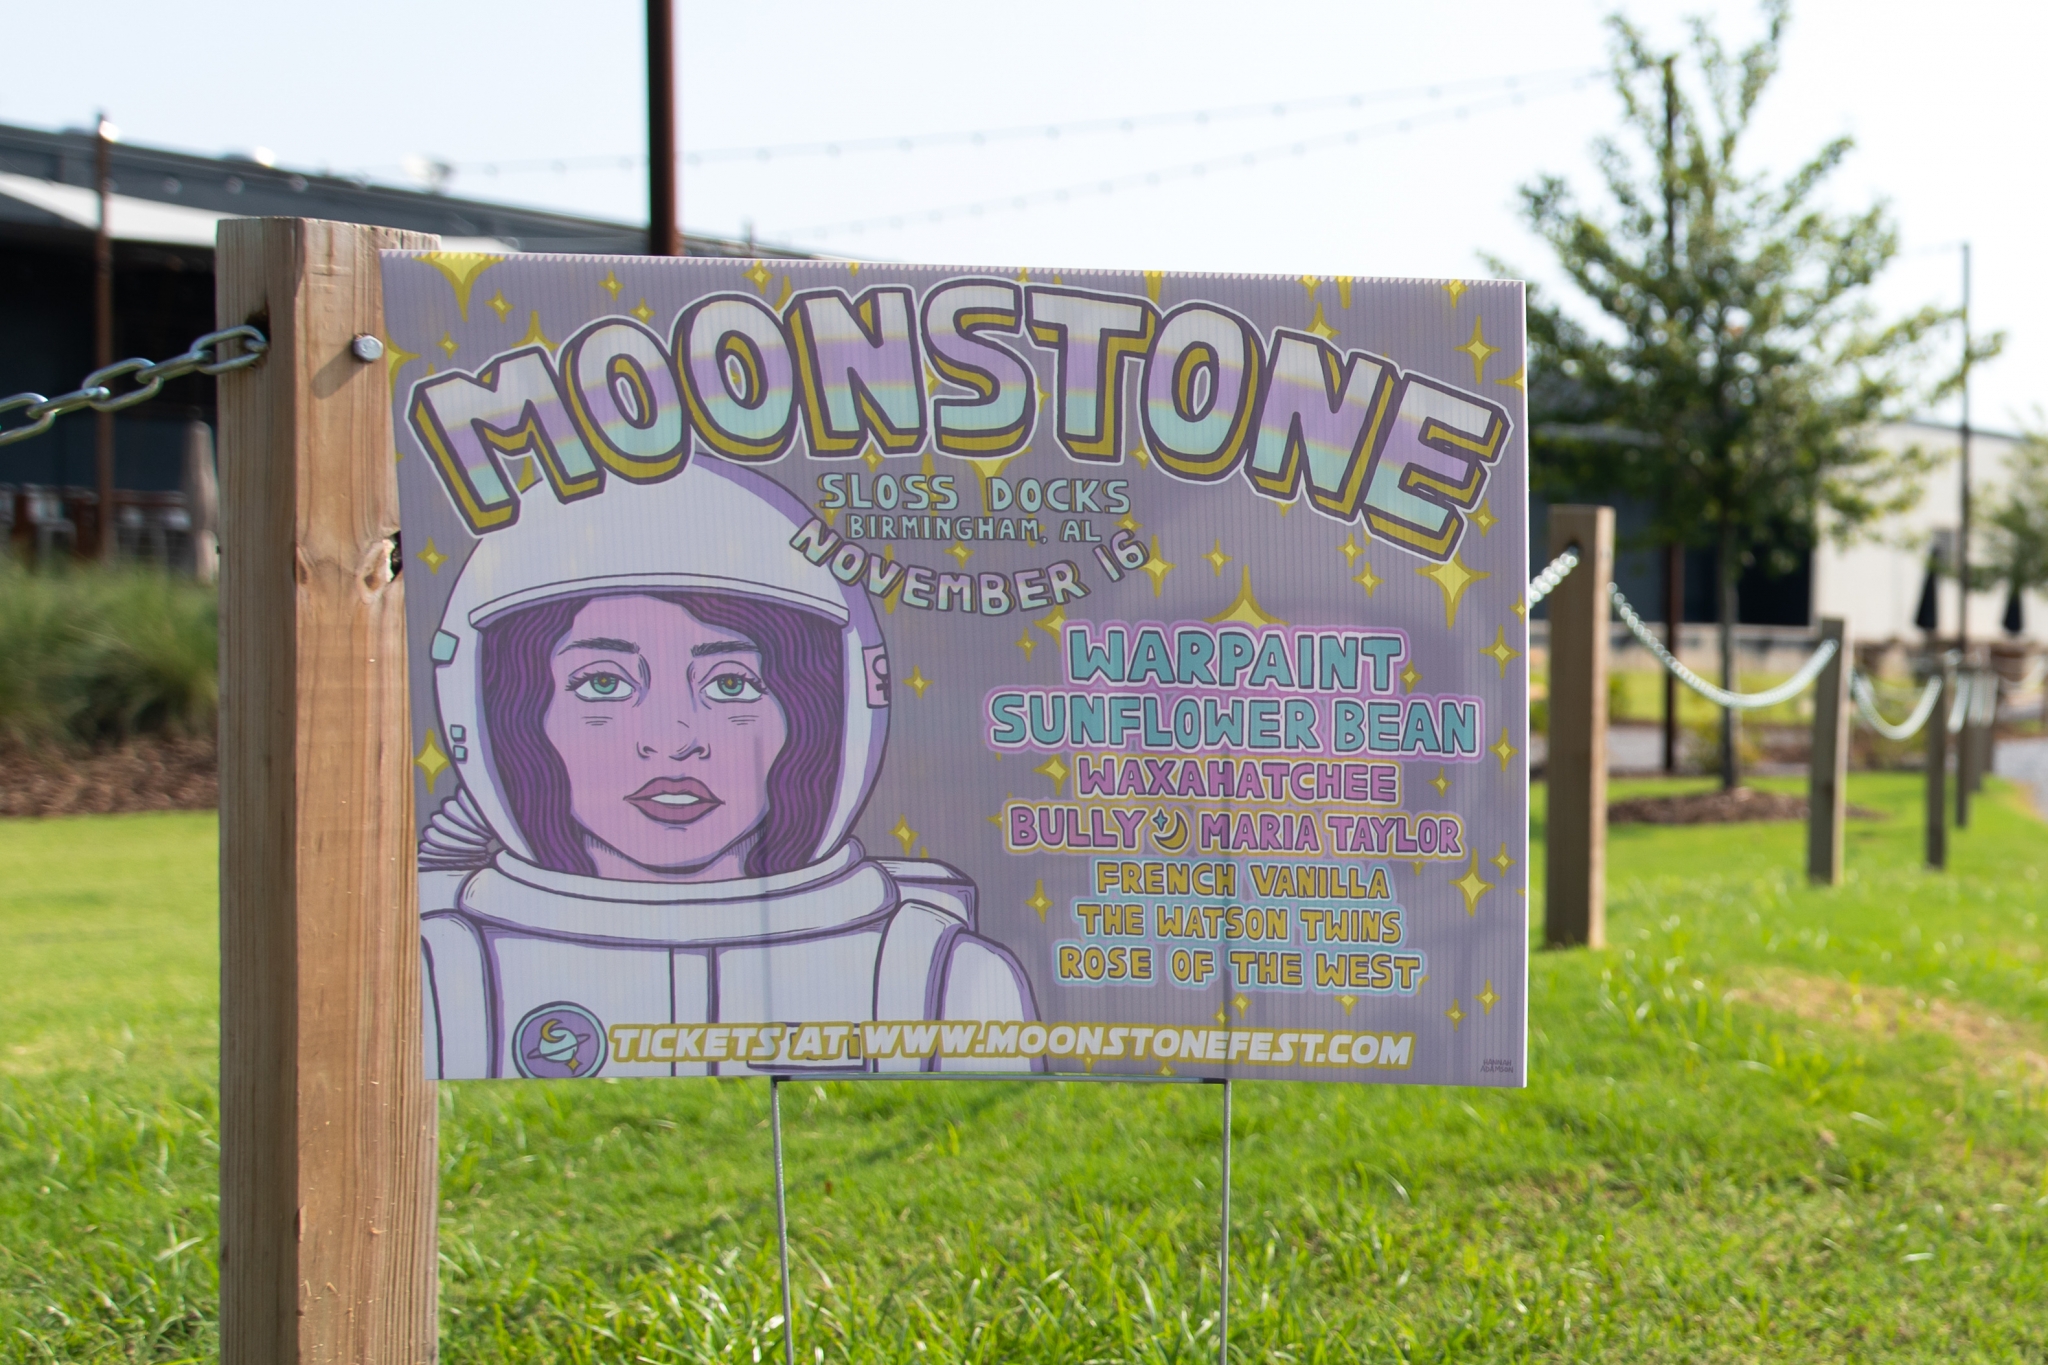 image 13 4 Your ultimate guide to Moonstone Music + Arts Festival happening Nov. 16 at Sloss Docks. Win tickets!